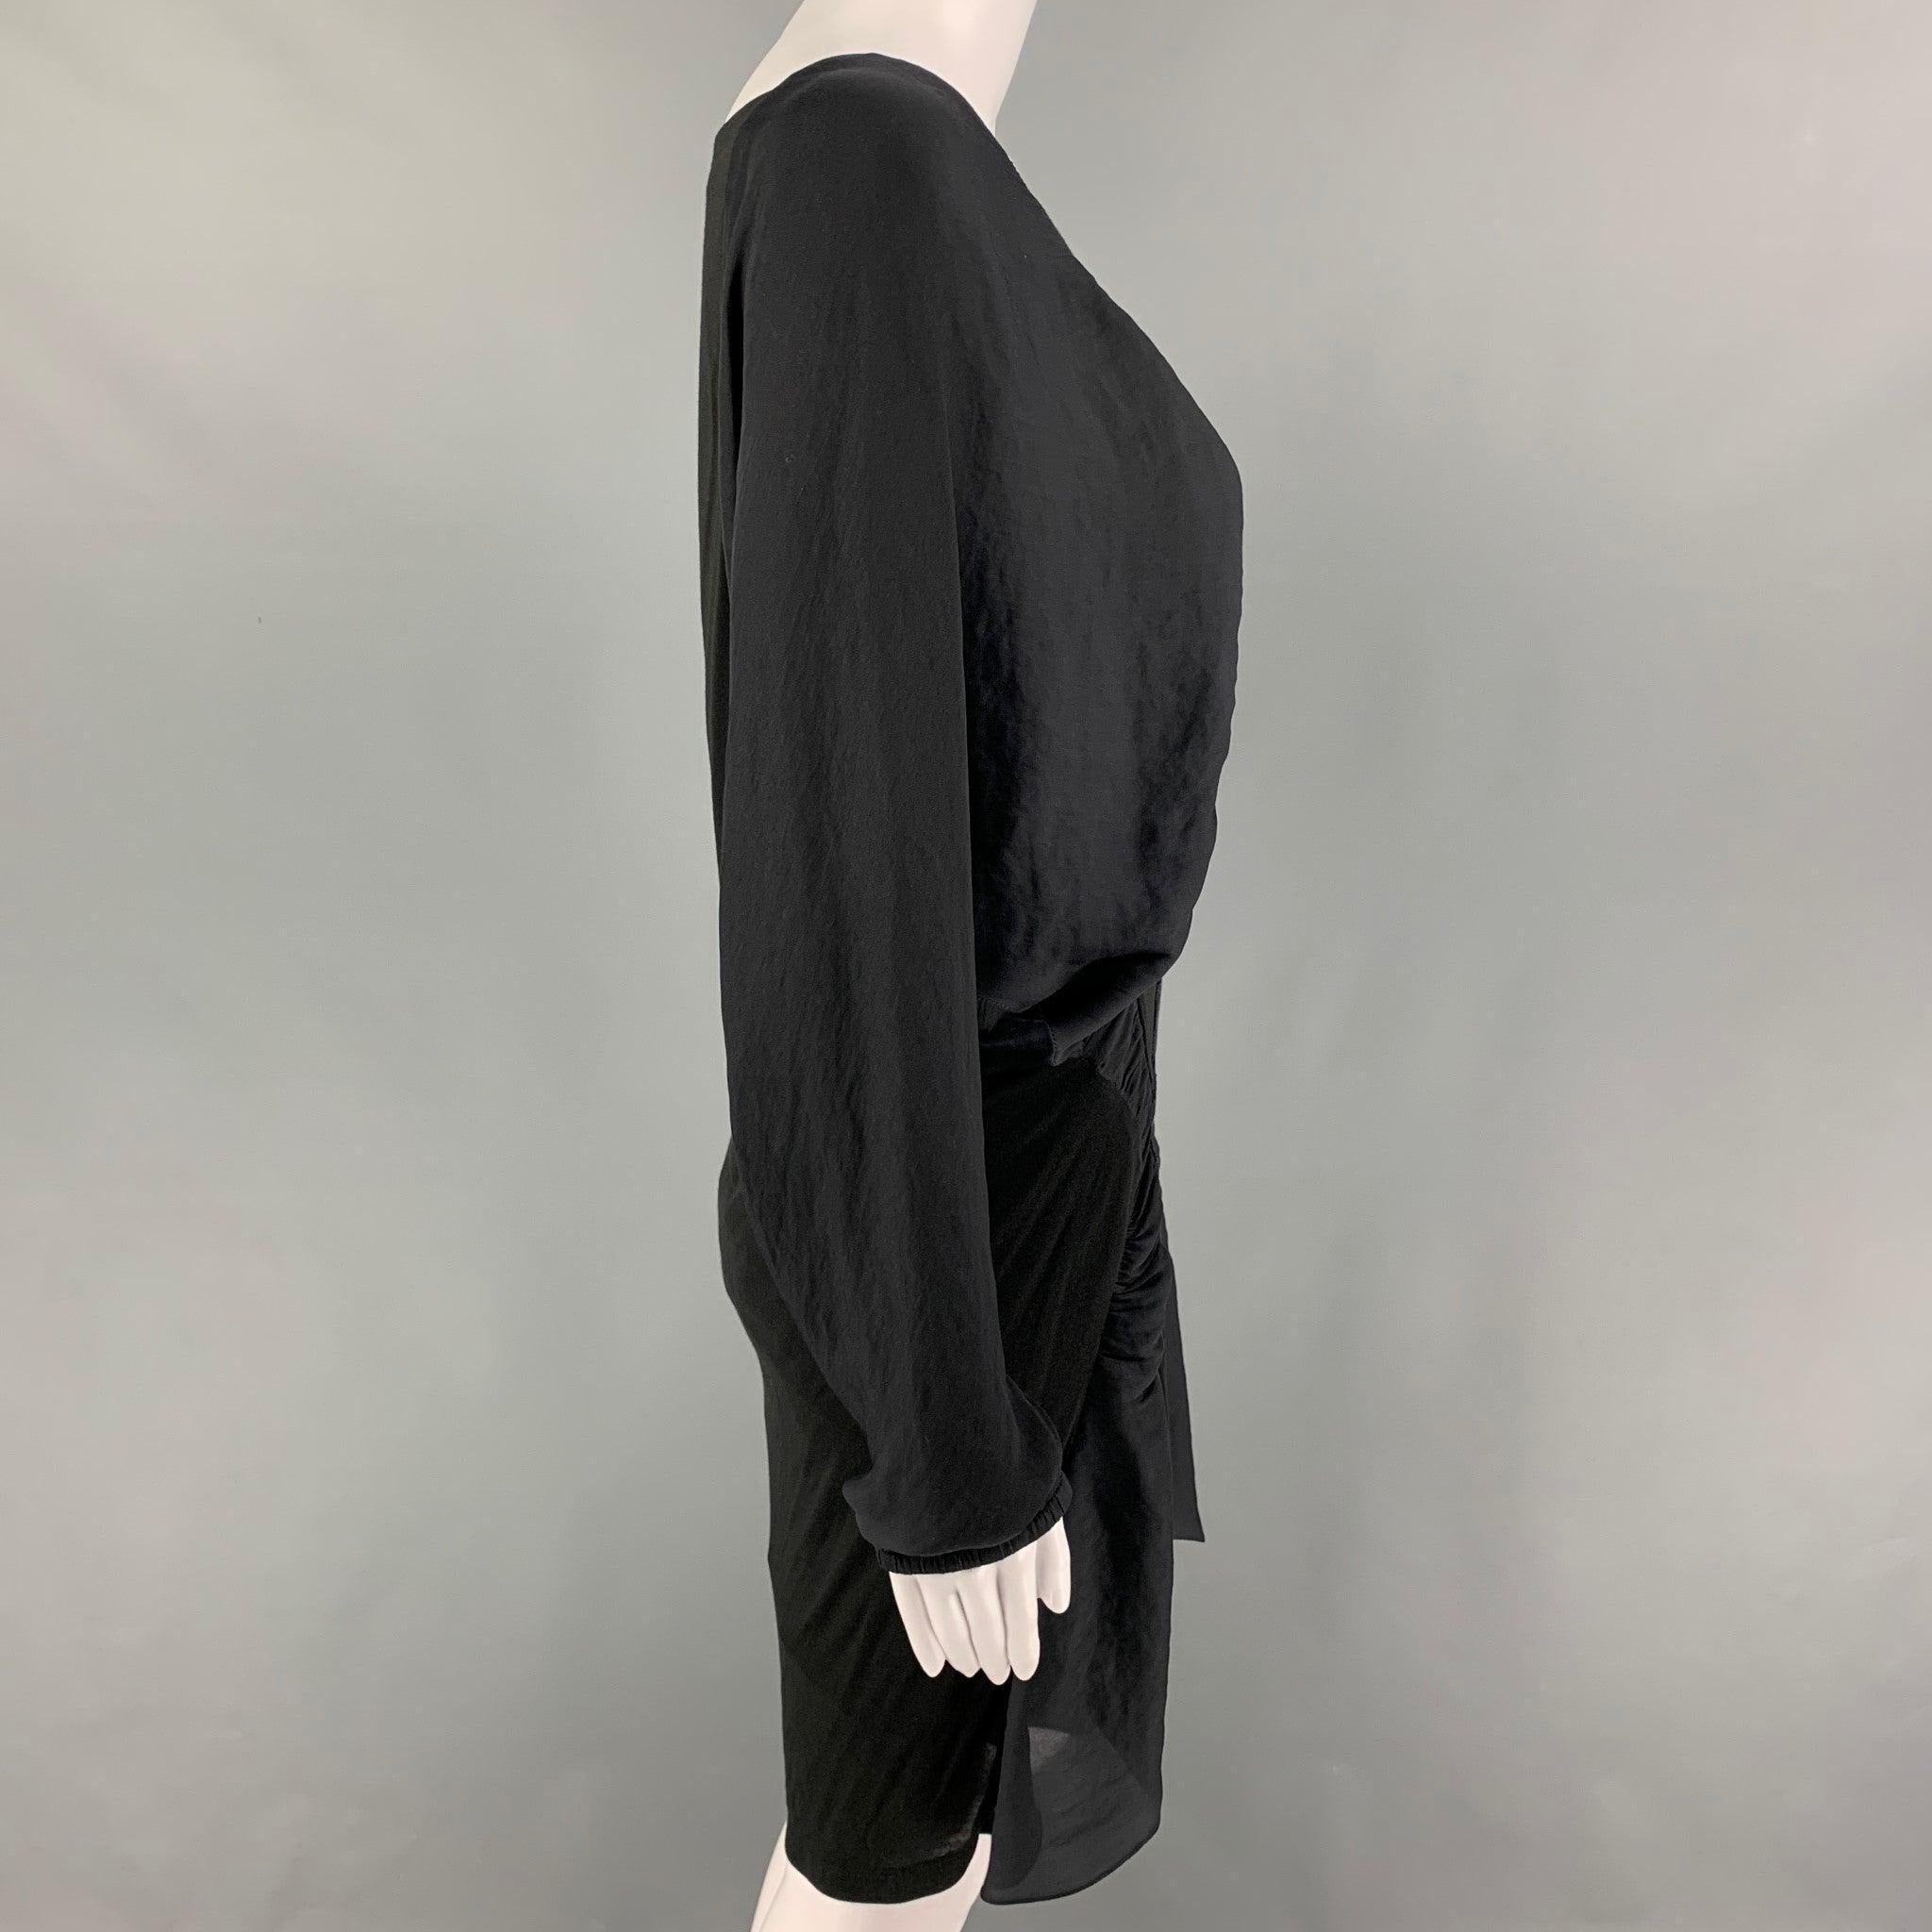 NINA RICCI dress comes in a grey & black mixed fabrics featuring dolman sleeves, ruched details, and a scoop neck. Made in France.
Very Good
Pre-Owned Condition. 

Marked:   36 

Measurements: 
 
Shoulder: 15.5 inches Bust: 40 inches Waist: 28